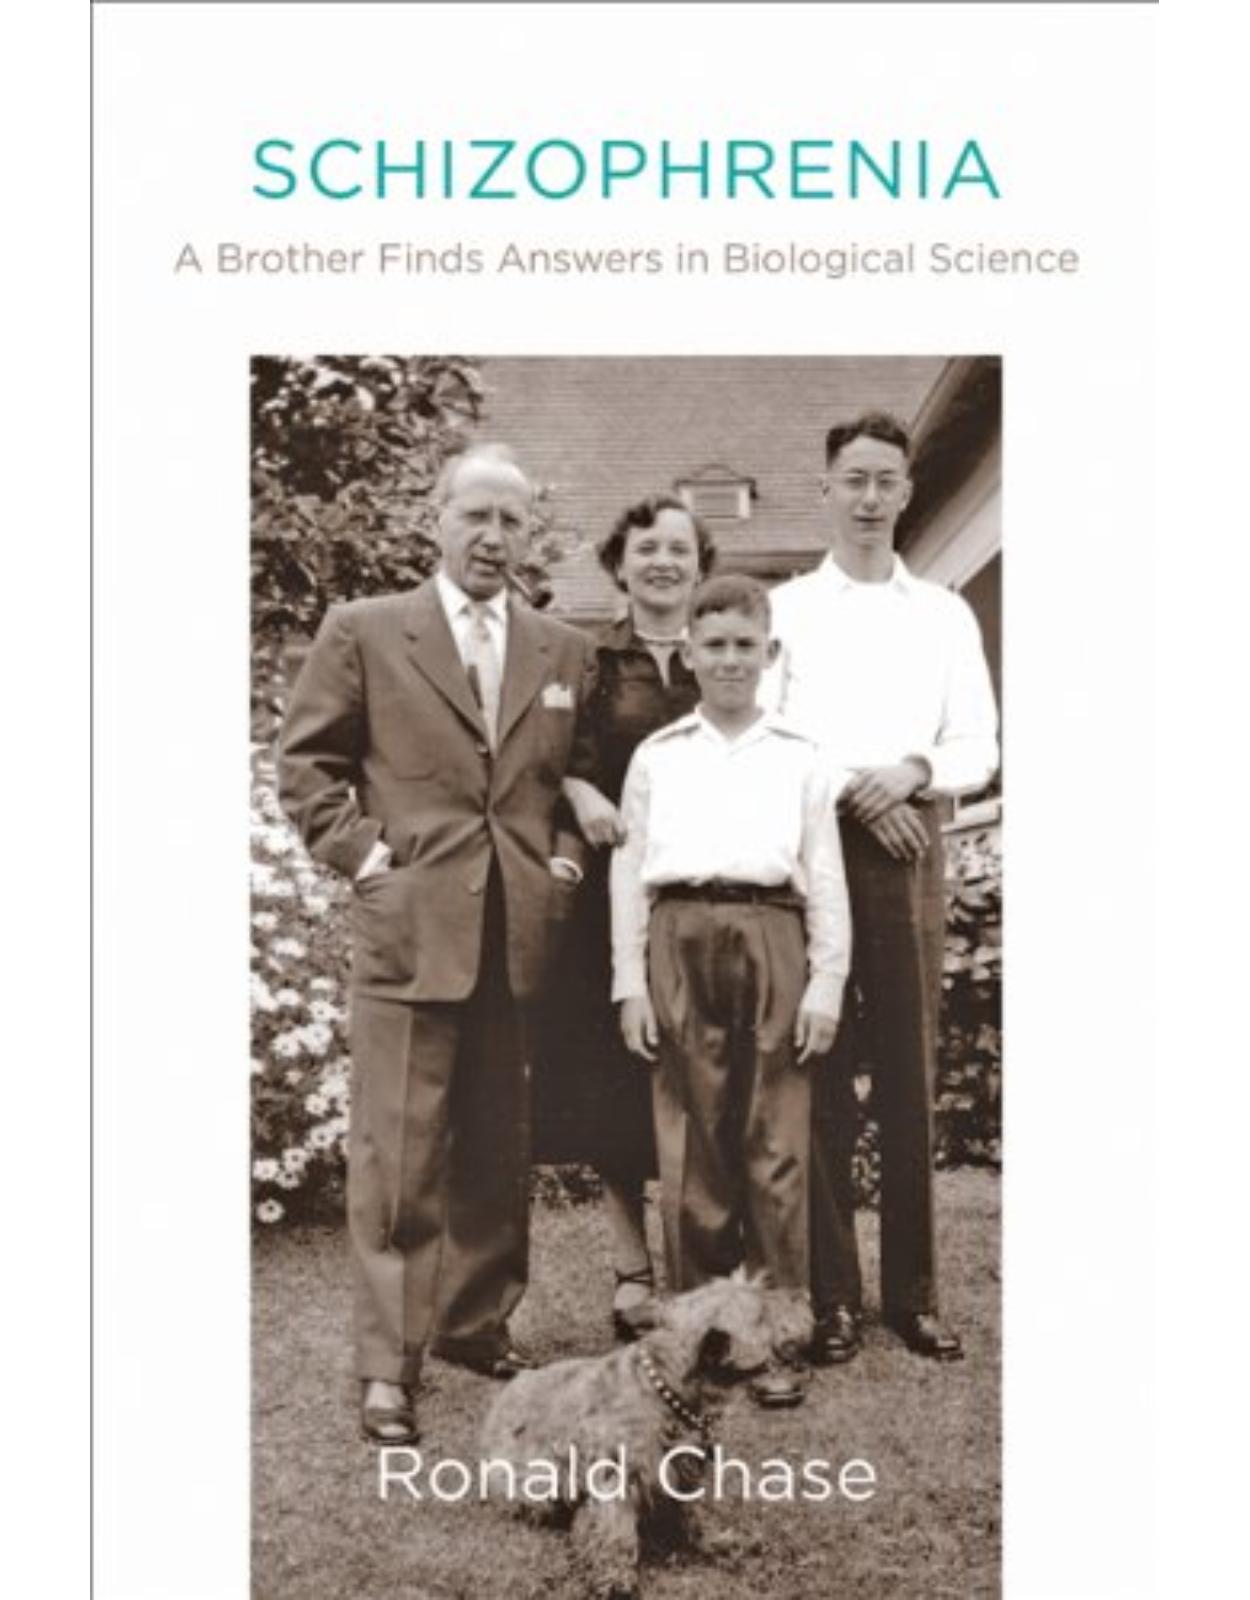 Schizophrenia. A Brother Finds Answers in Biological Science